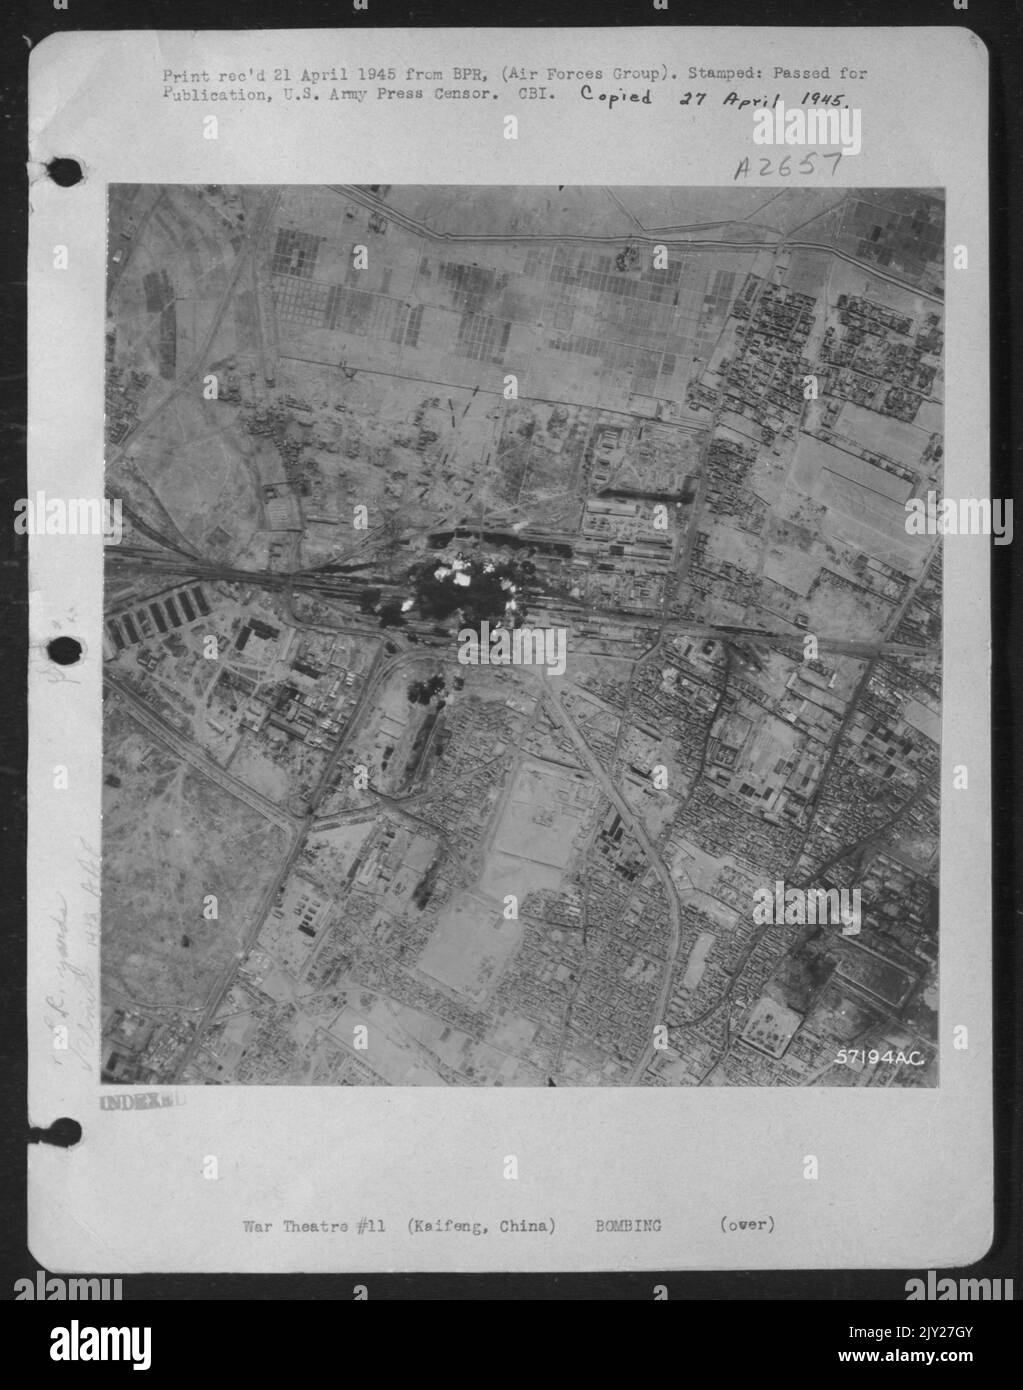 China - A Devastating Strike At The Japanese-Held Kaifeng Railroad Yards In Northeast China By Consolidated B-24's Of The 308Th Bombardment Group Of Major General Chennault's 14Th Af In The Flying Tigers' Assault On Points Vital To The Japaneses Drive South Of The Stock Photo